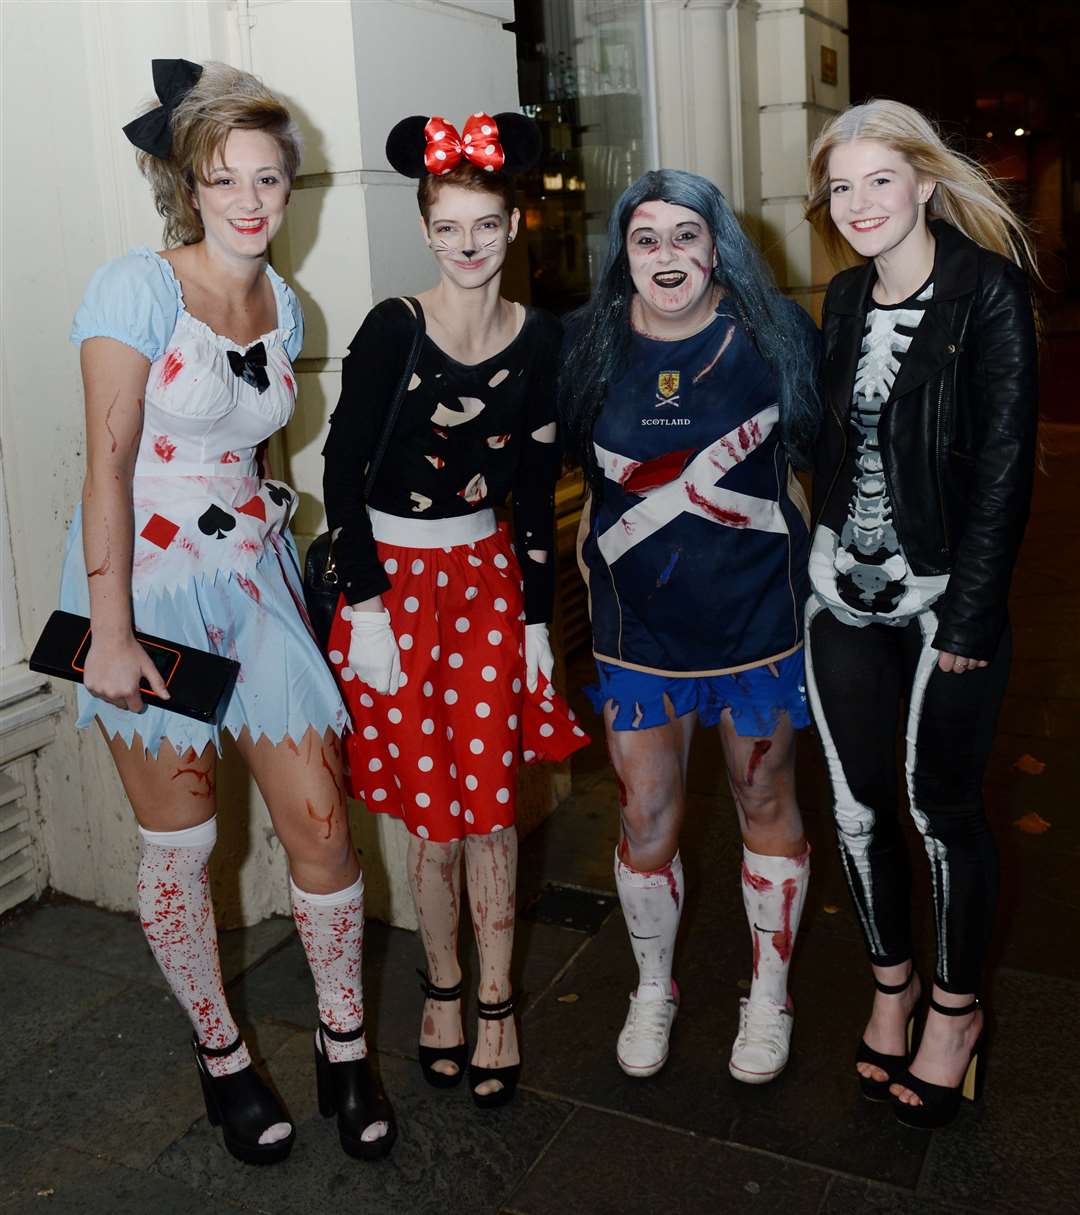 Caitlin Morrison, Cat MacIver, Steph Campbell and Freya Lowe, who all work at Next. CitySeen on Halloween 31/10/15. Picture: Alison White